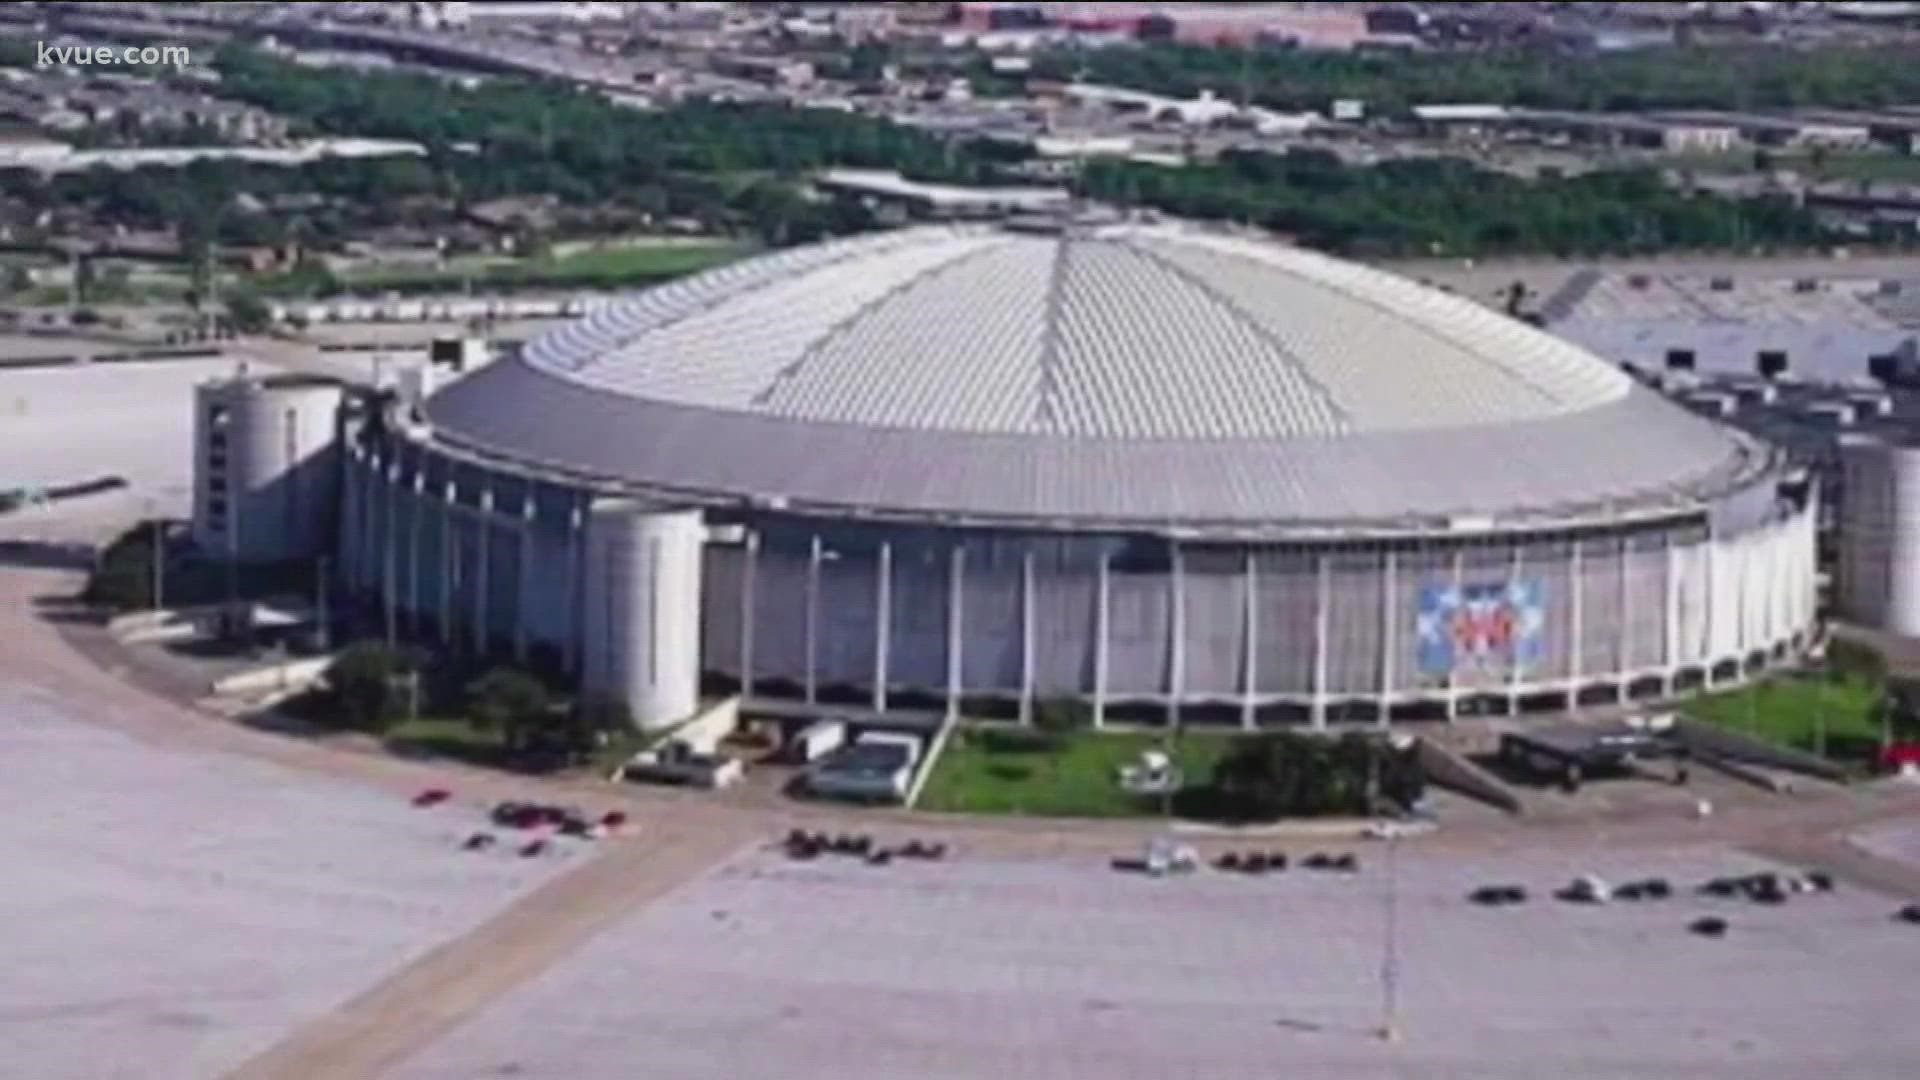 Sixty years ago today, crews started building what would eventually be called the Eighth Wonder of the World – the Houston Astrodome.